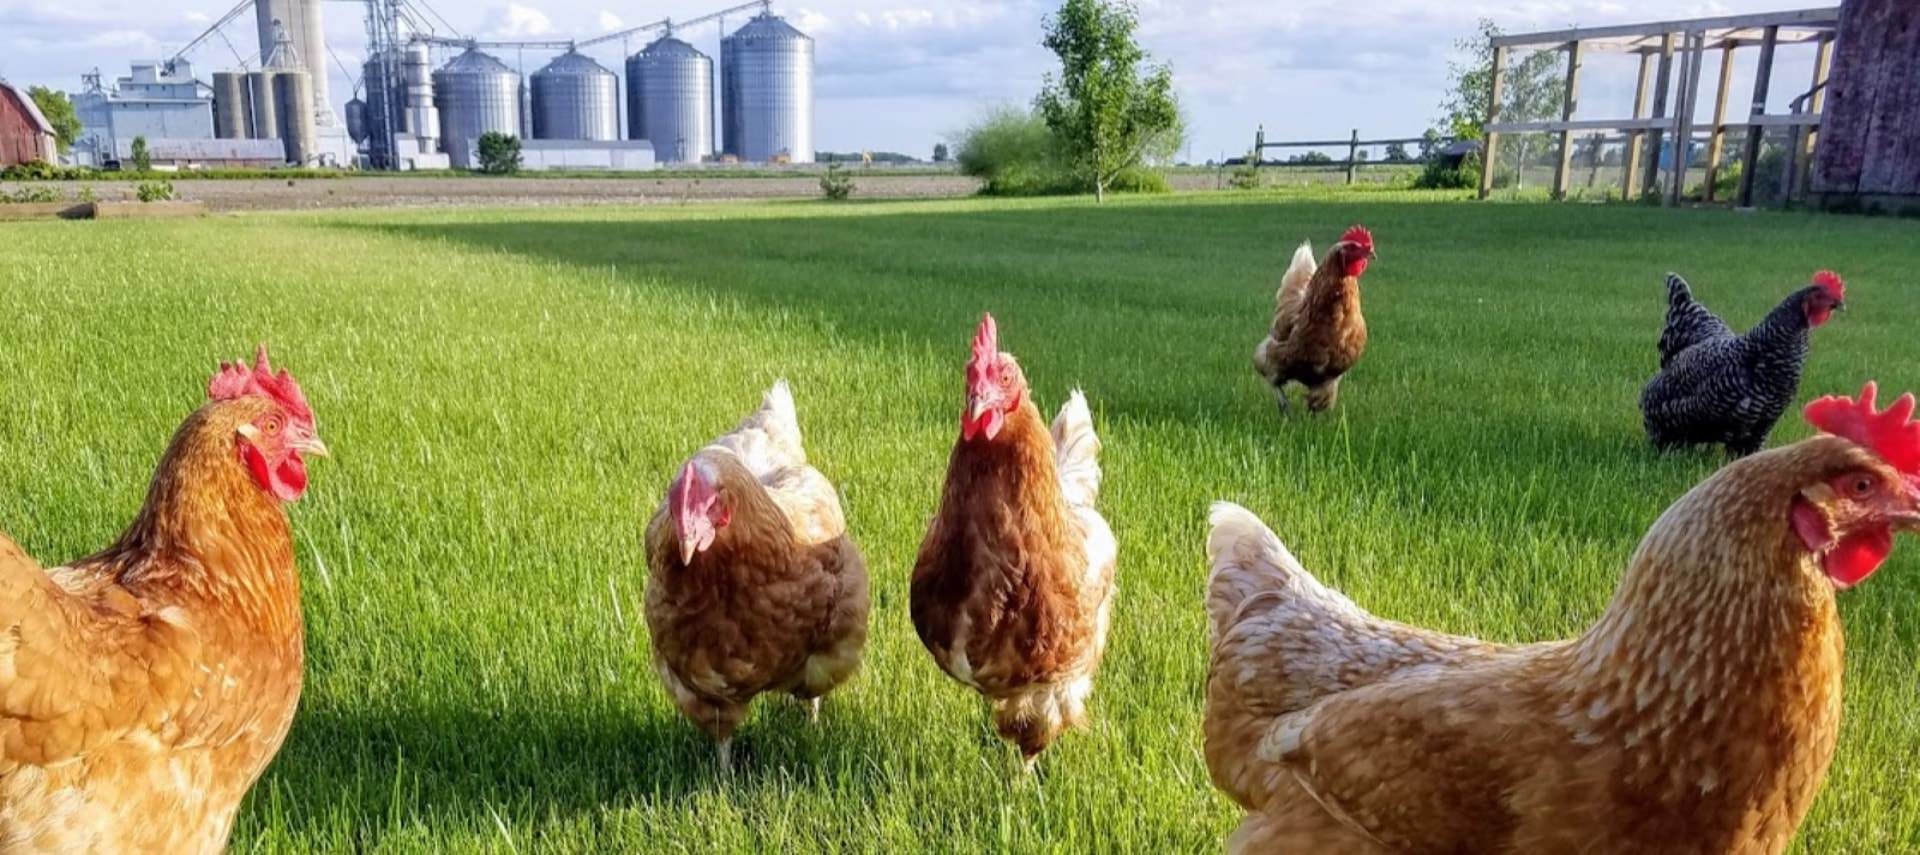 Brown and black chickens running in green grass with grainery in the background